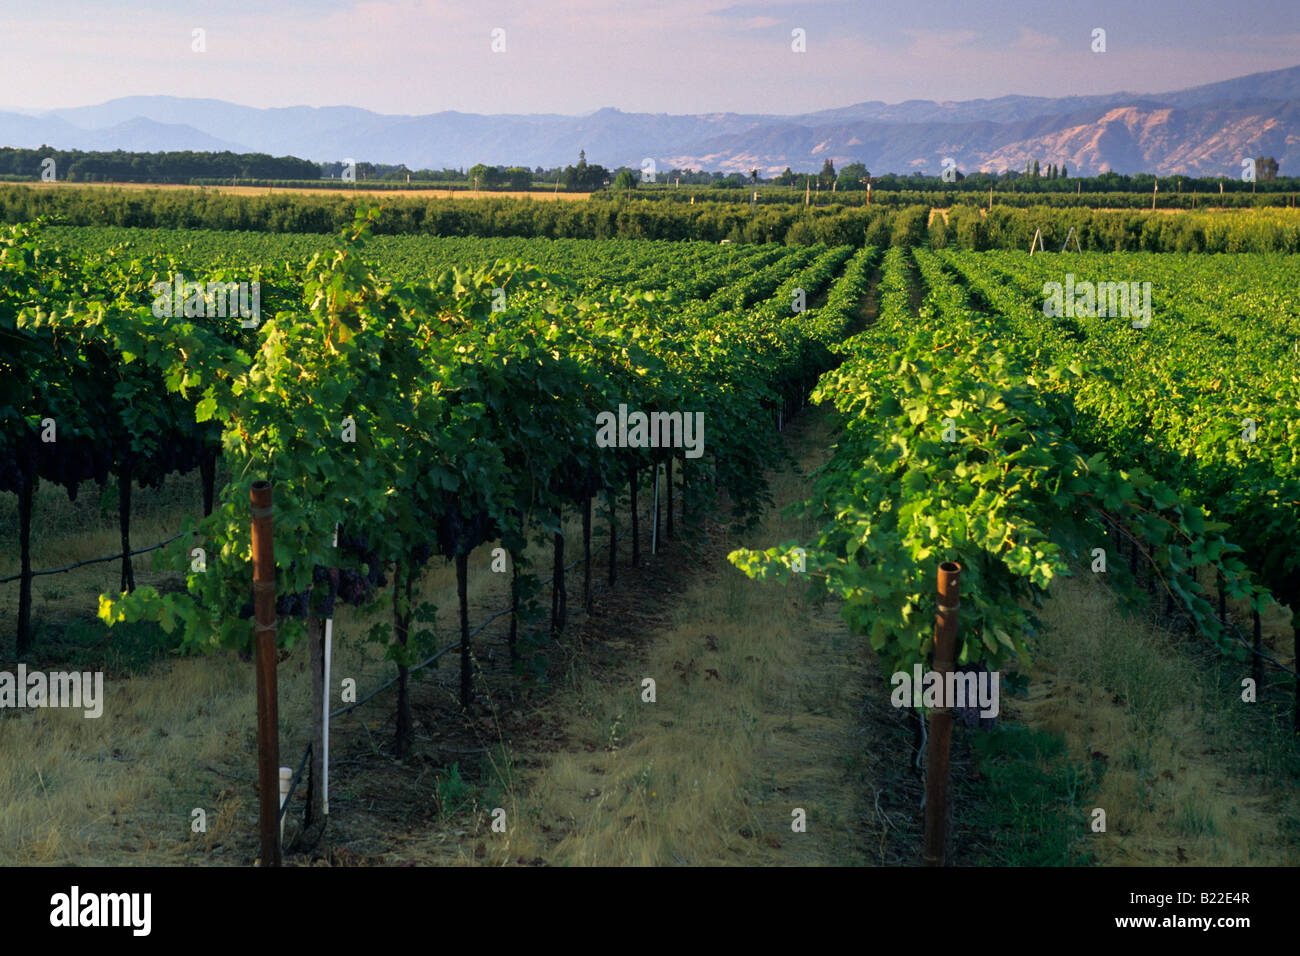 Vineyards in the Big Valley near Kelseyville Lake County California Stock Photo